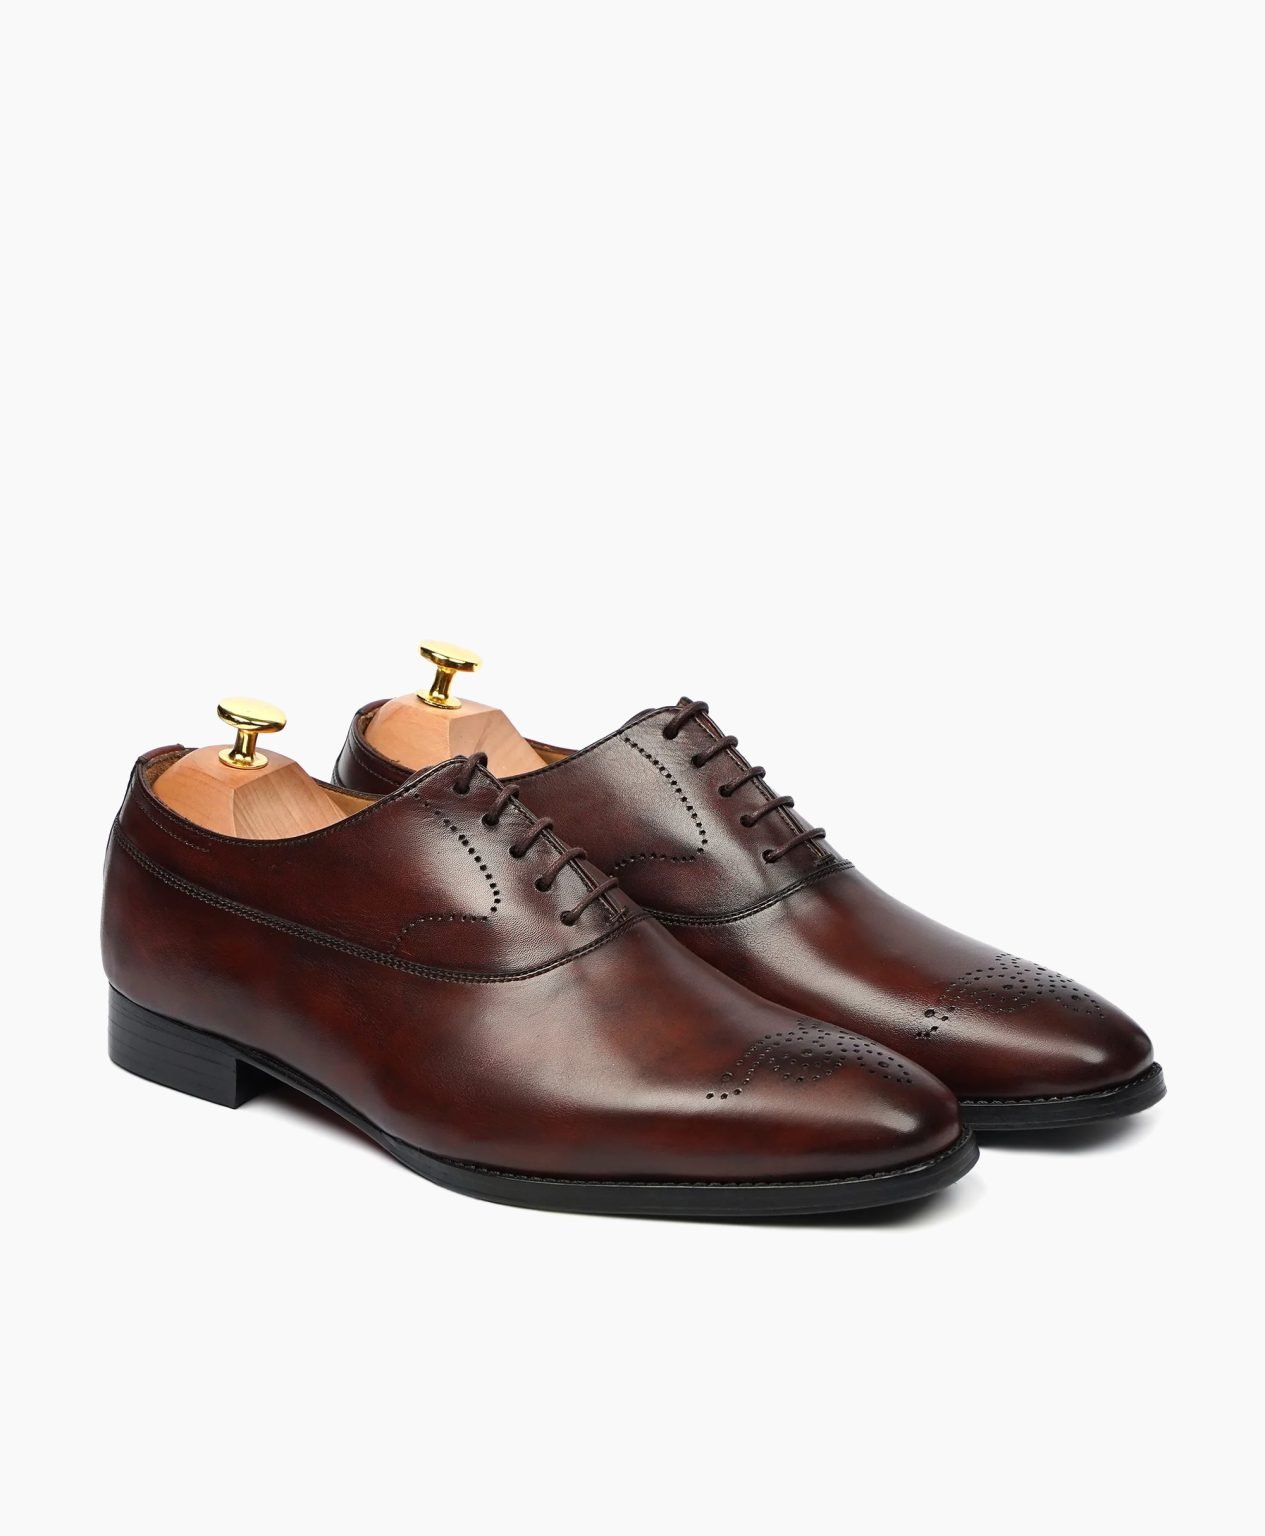 wycombe-oxford-oxblood-leather-shoes-image200